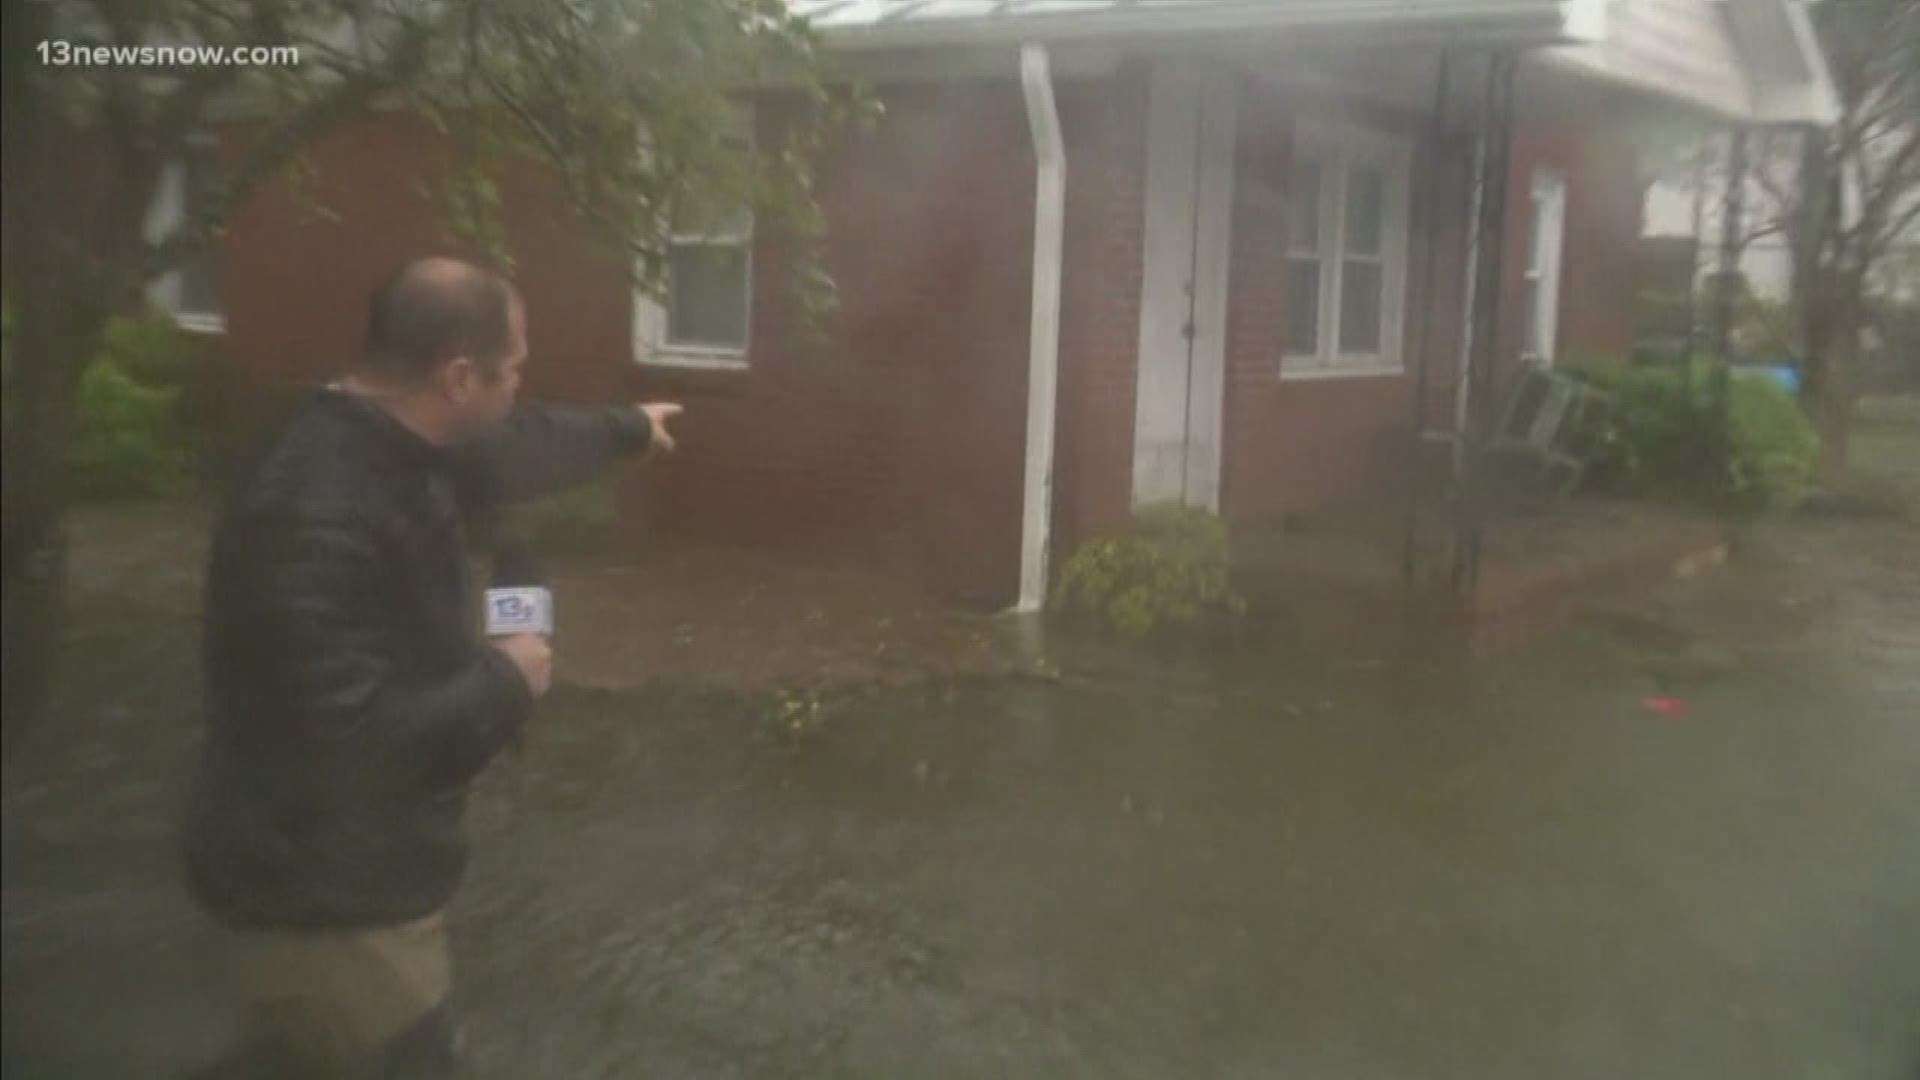 13News Now Robert Boyd was in New Bern, North Carolina where the flooding and storm surge ravaged the town in tremendous amounts.